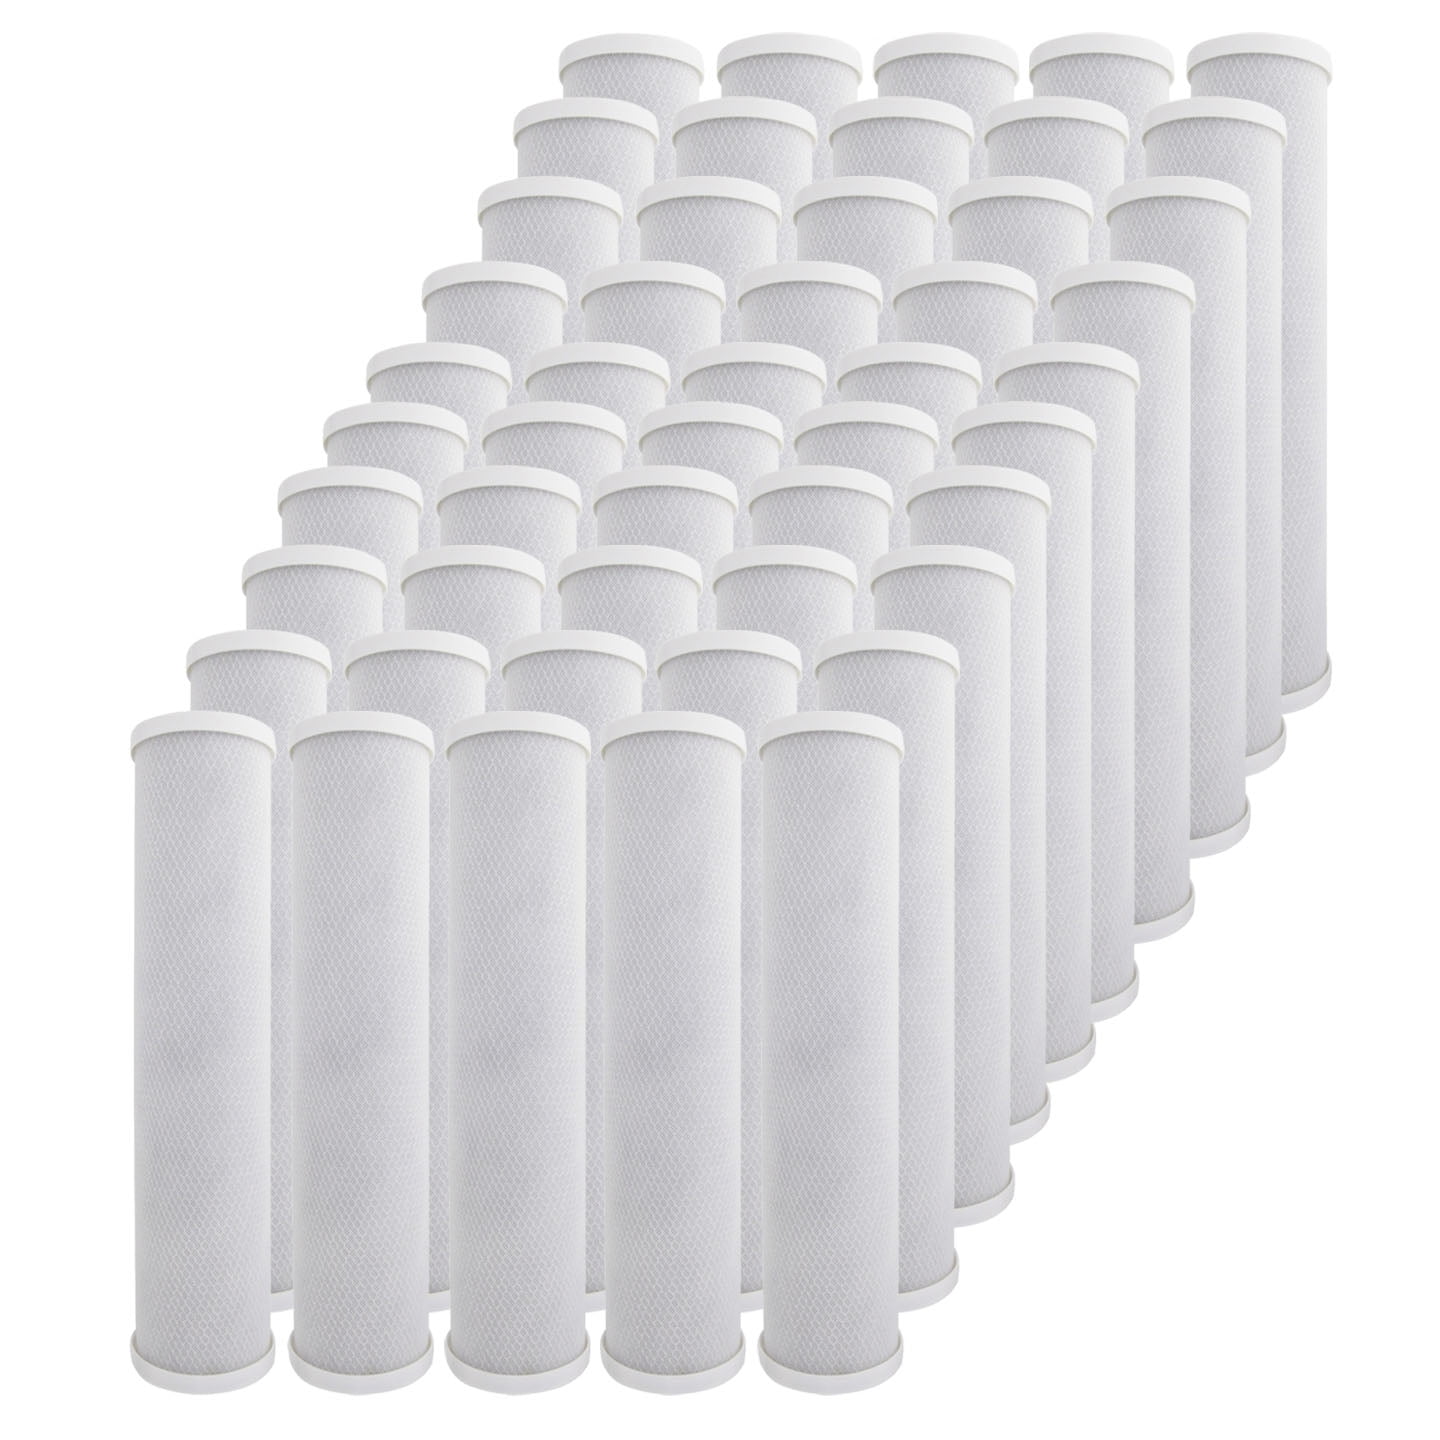 20 x 4.5 5 Micron Pentek EP-20BB Comparable Whole House Carbon Water Filter 